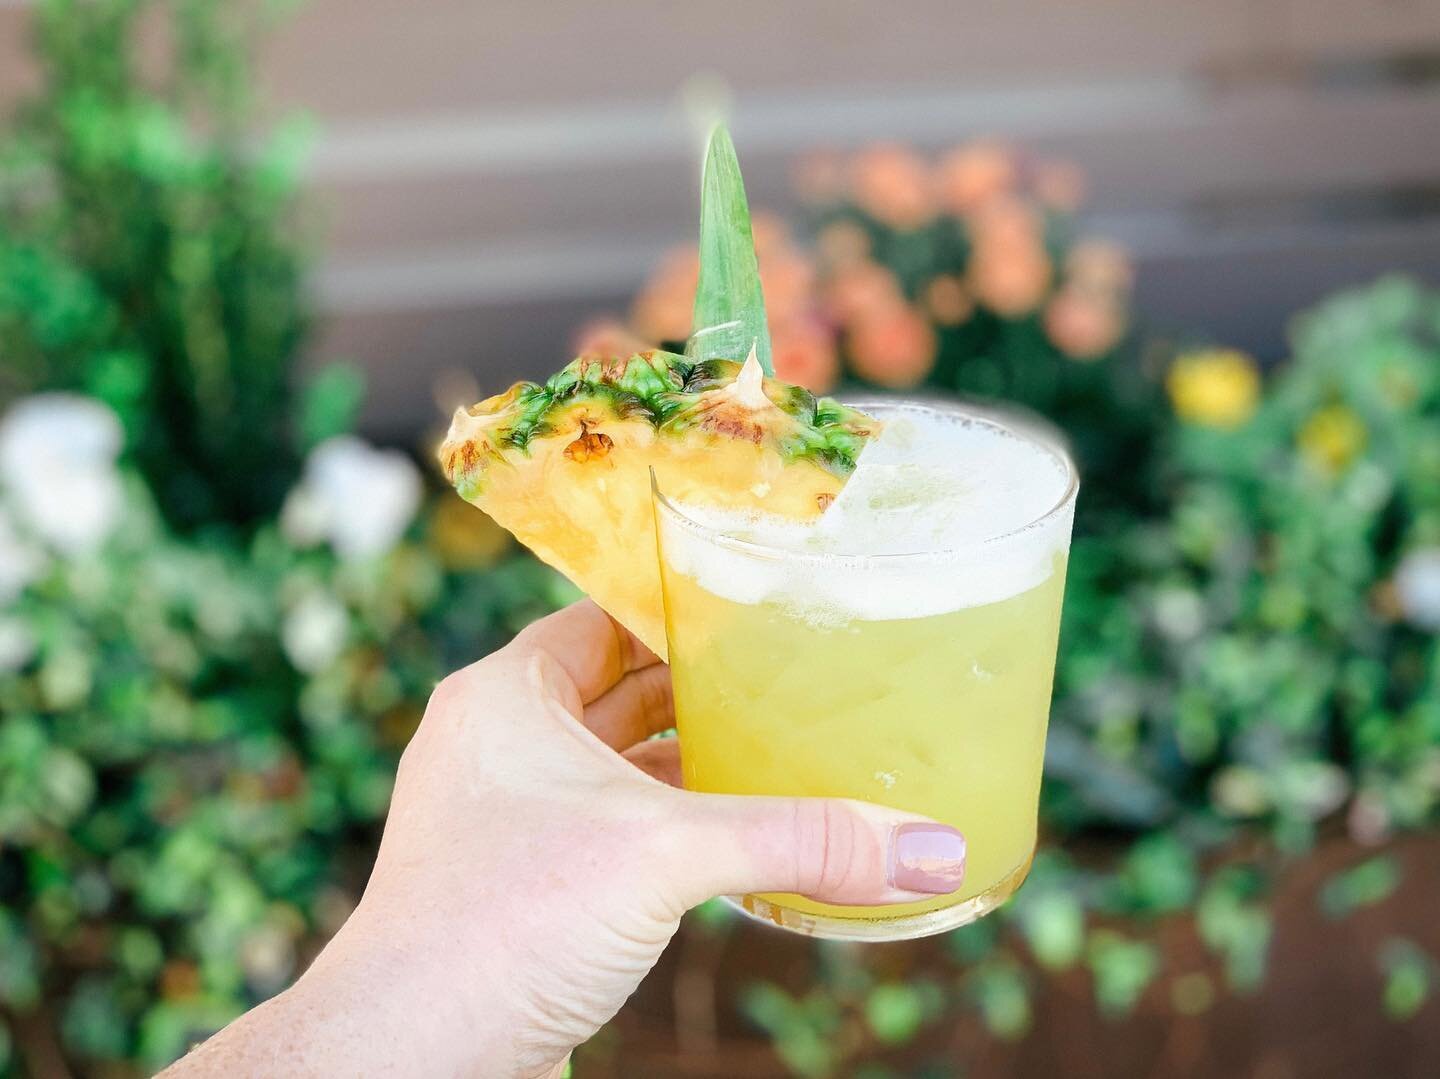 Did you know that our Happy Hour spans across the entire Garden?!

Join us every Monday-Friday from 3-6 for a specialty $4 cocktail menu from @perennial.bar and a selection of happy hour food items from each airstream - @bocalatinkitchen, @esaanthai,